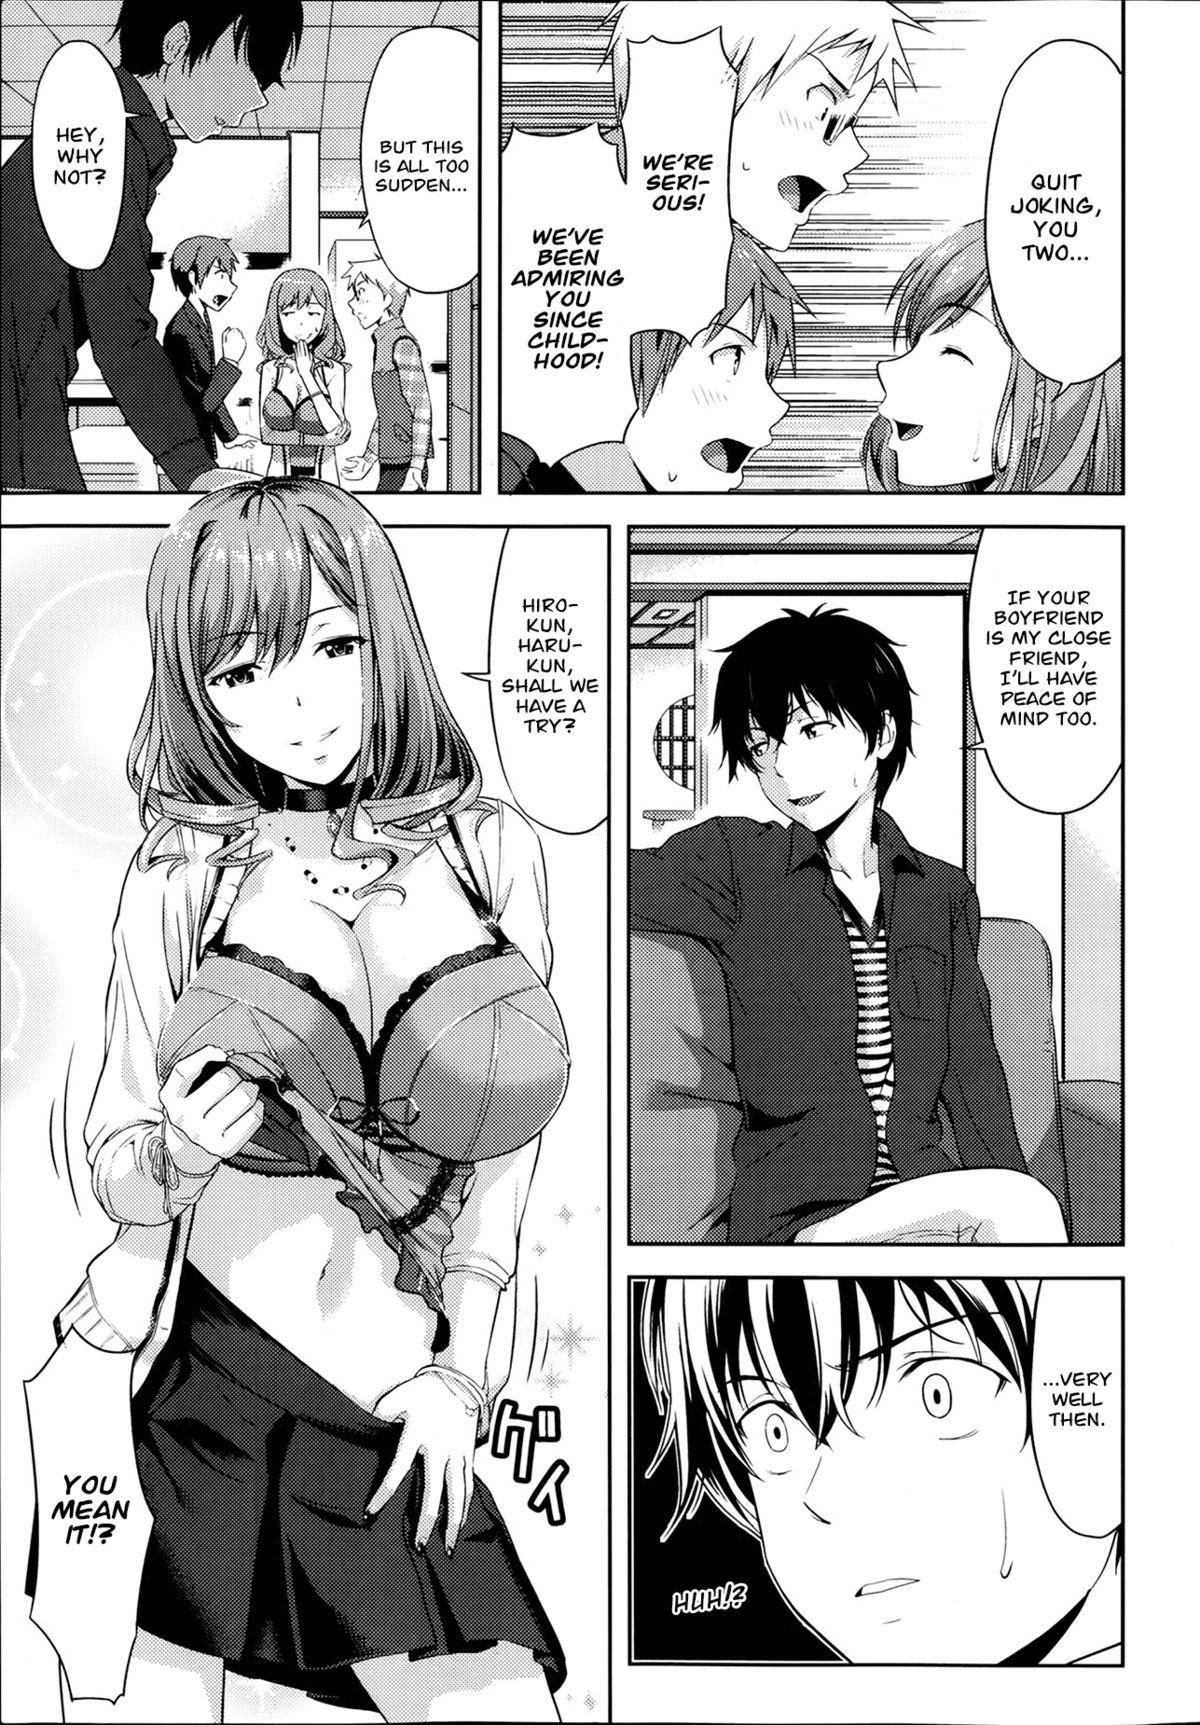 Horny Slut Transit + Otometic Overdrive Room - Page 9